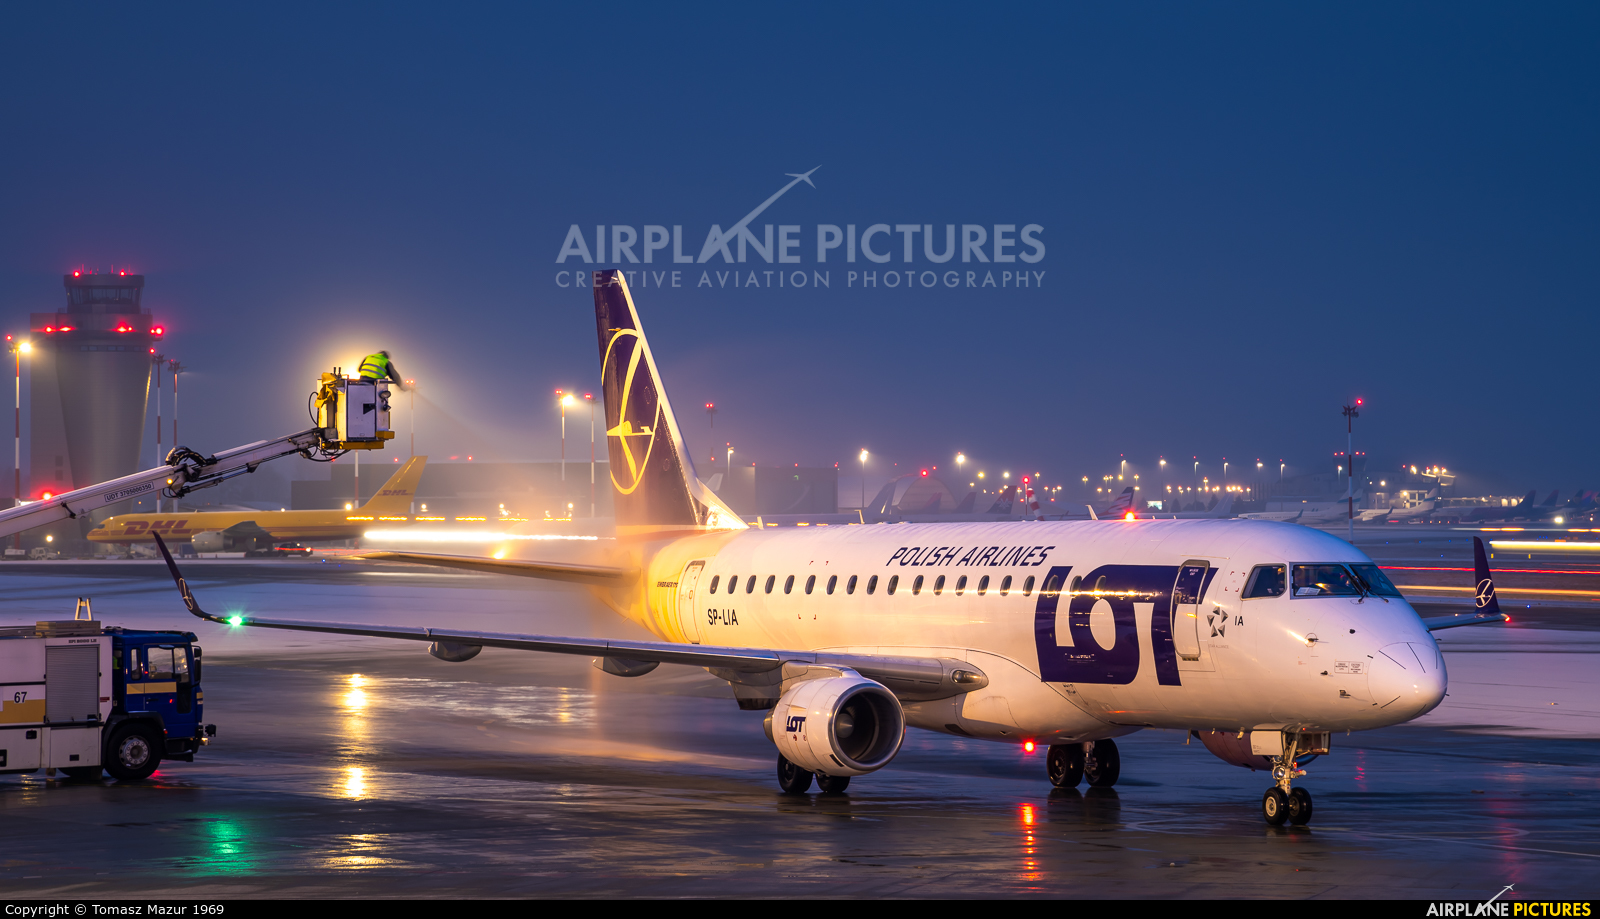 LOT - Polish Airlines SP-LIA aircraft at Katowice - Pyrzowice